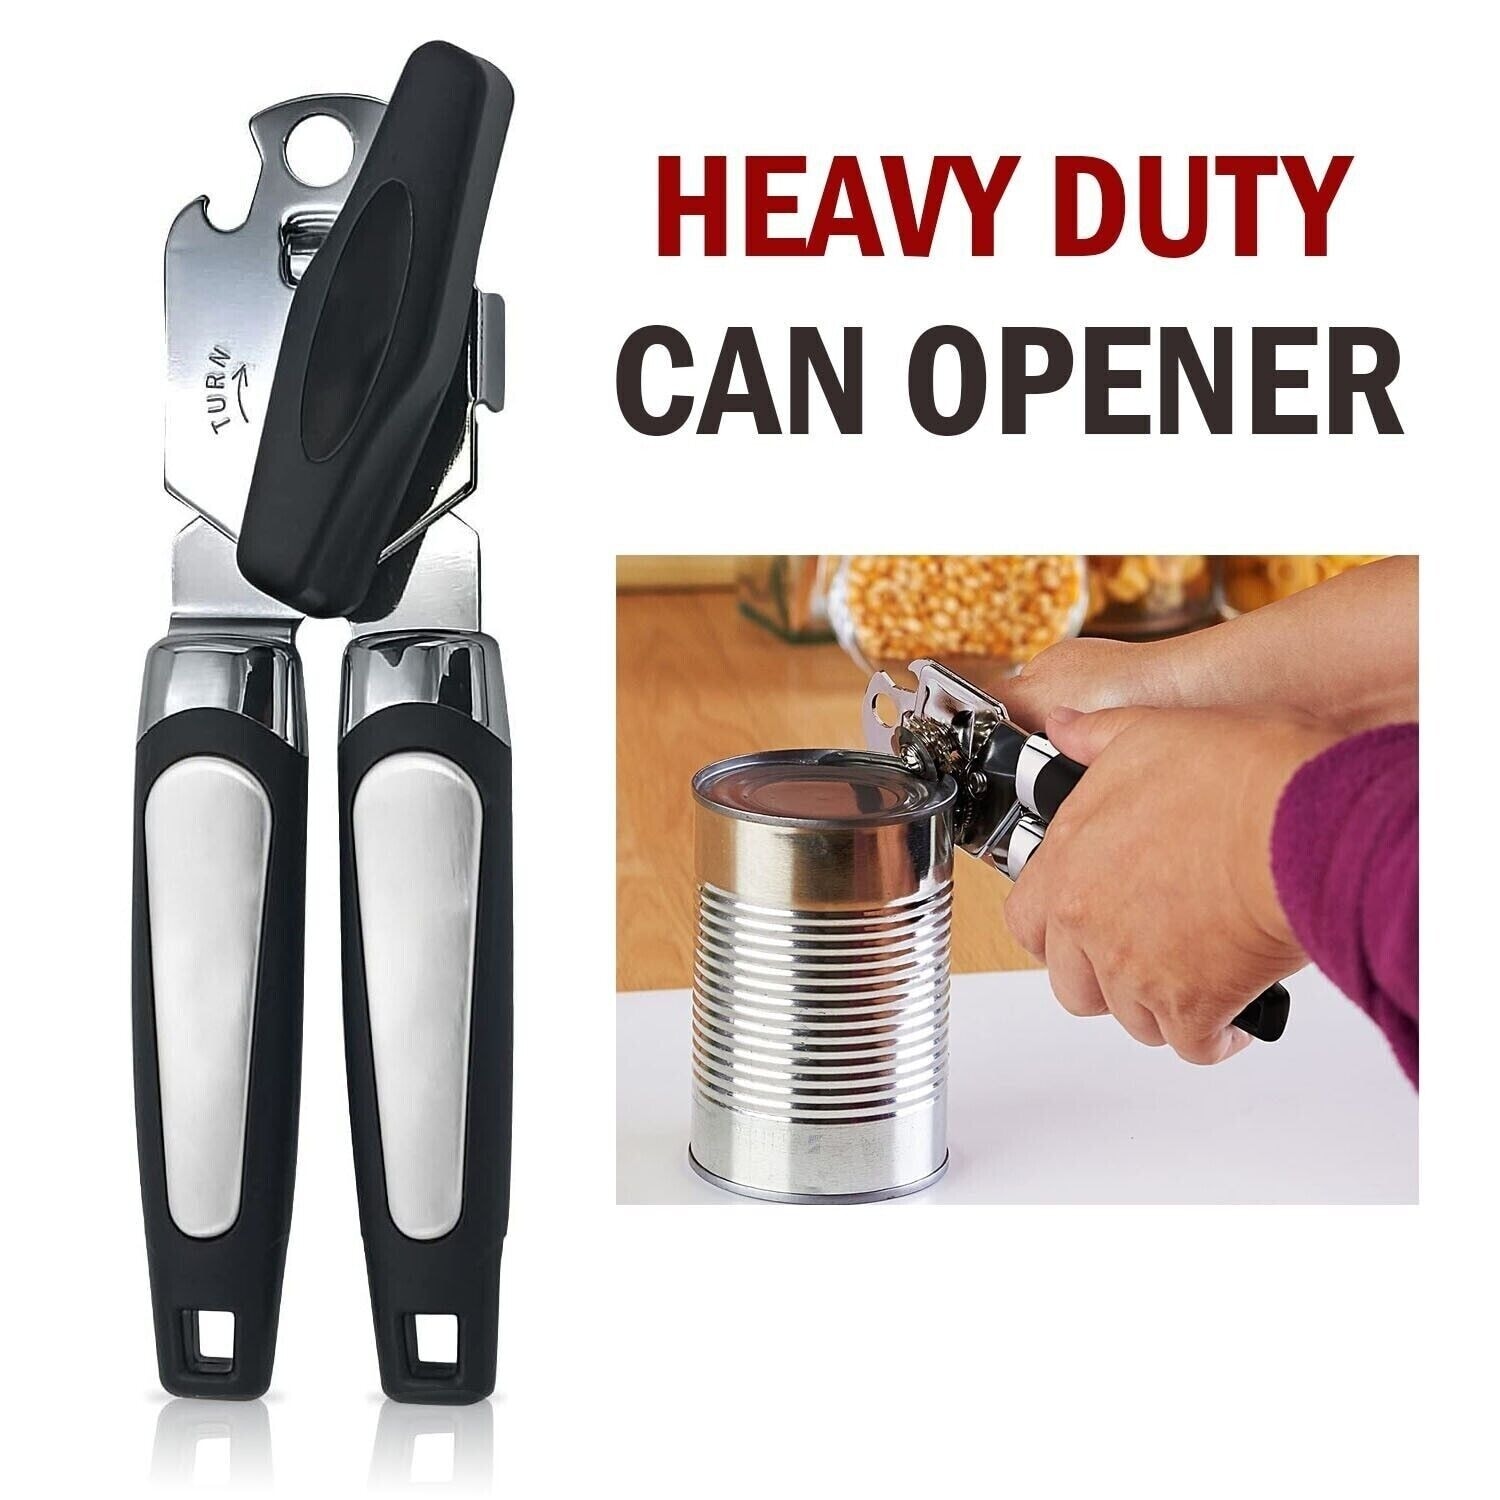 https://ak1.ostkcdn.com/images/products/is/images/direct/375364f6b66dad0748312c4084580e5c958b9232/Heavy-Duty-Stainless-Steel-Can-Opener.jpg